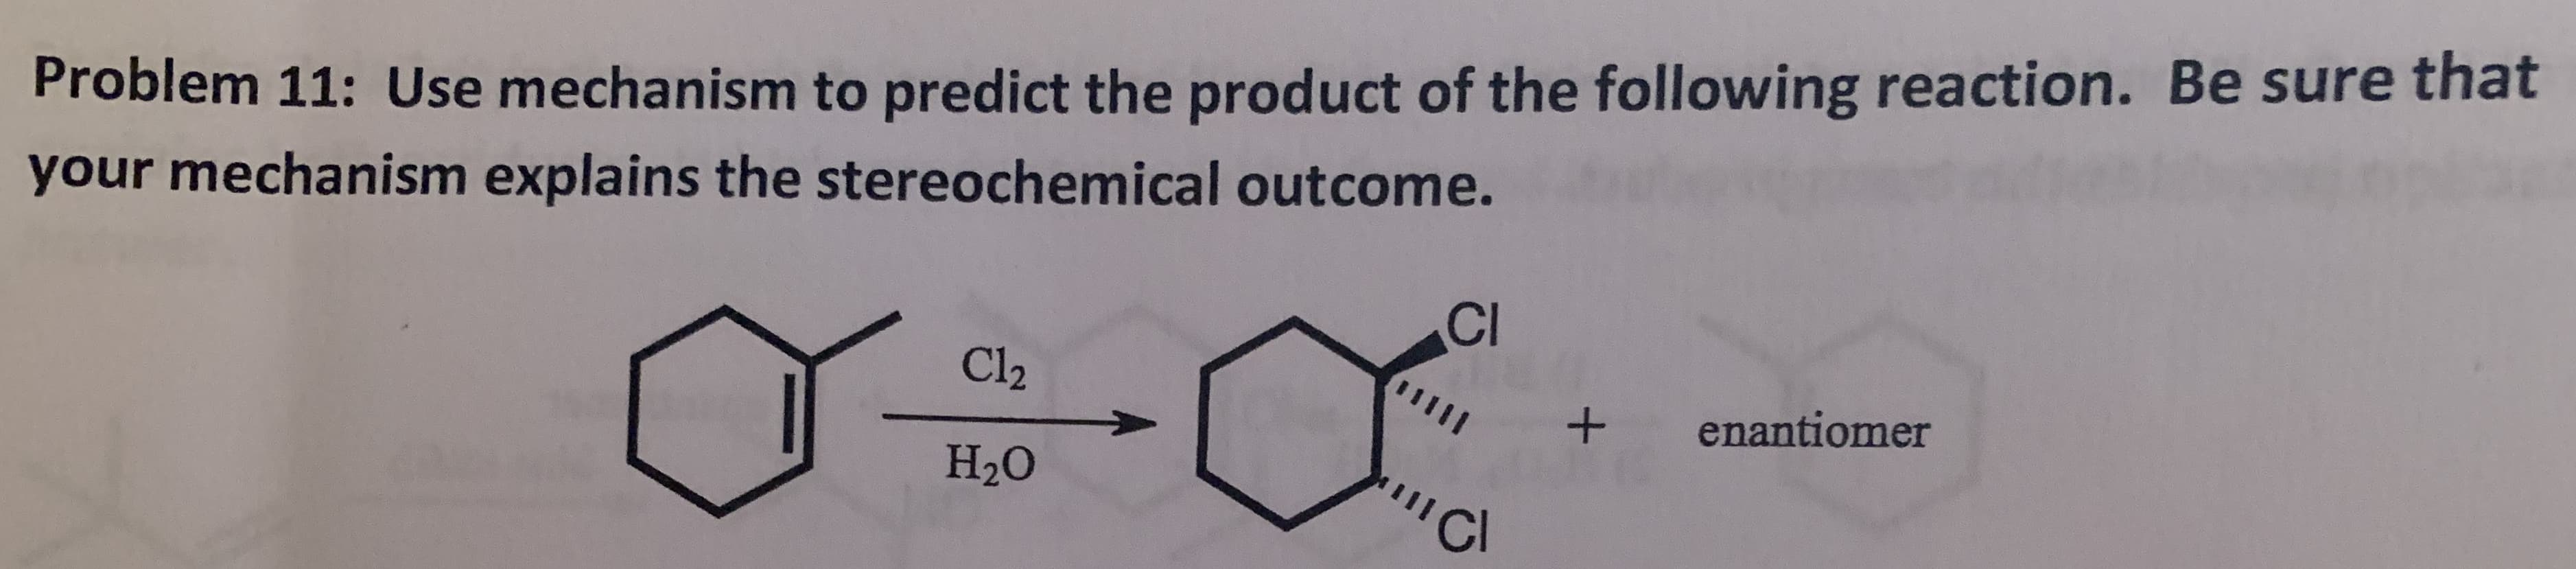 your mechanism explains the stereochemical outcome.
CI
Problem 11: Use mechanism to predict the product of the following reaction. Be sure that
Cl2
enantiomer
I
Н.0
'Cl
+
